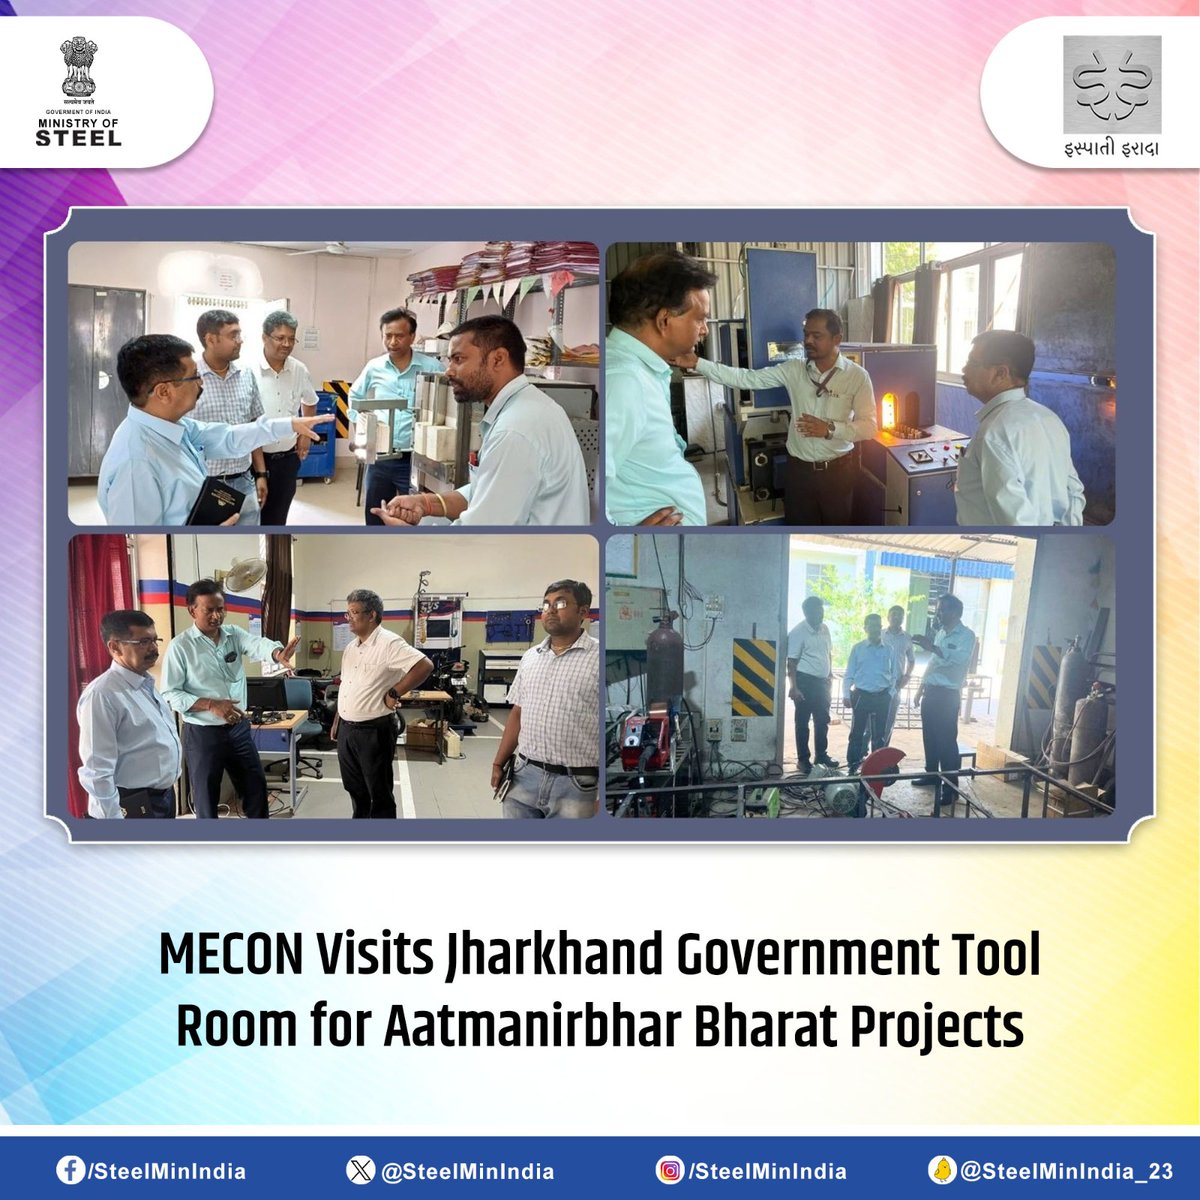 #MECON collaborates with Jharkhand Government Tool Room to assess capabilities for manufacturing critical components & refractory testing, aligning with #AatmanirbharBharat. Expanding horizons through consultancy services. #SelfReliantIndia #Manufacturing